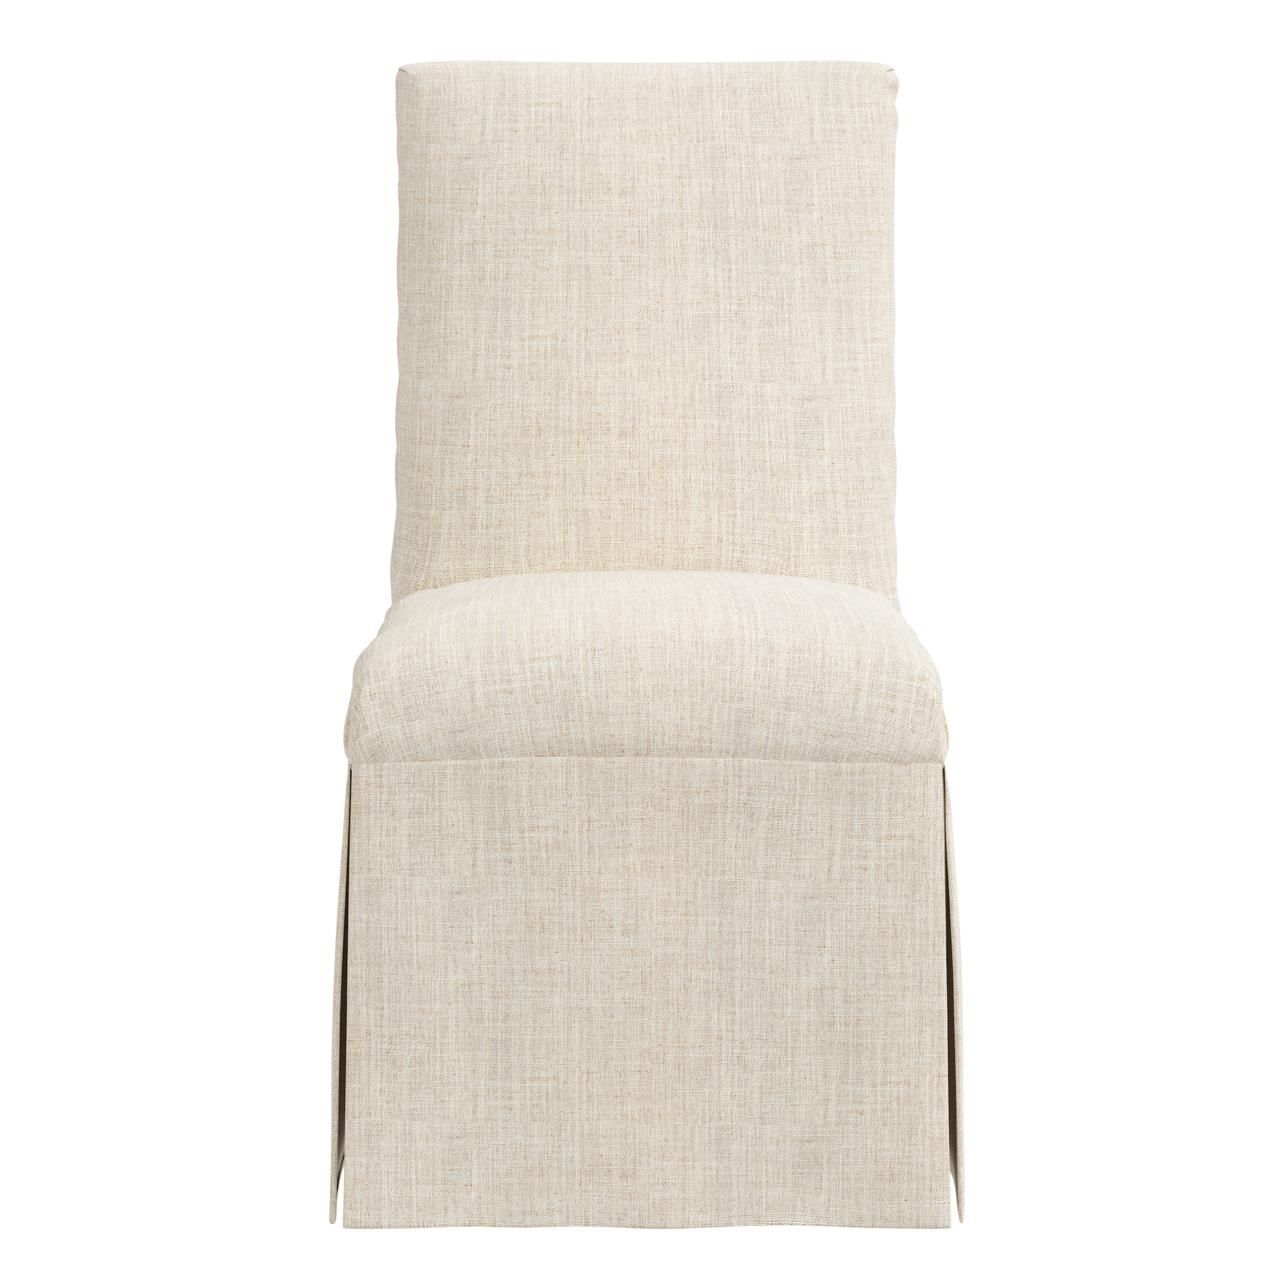 Magnolia Slipcover Dining Chair, Talc - Image 1